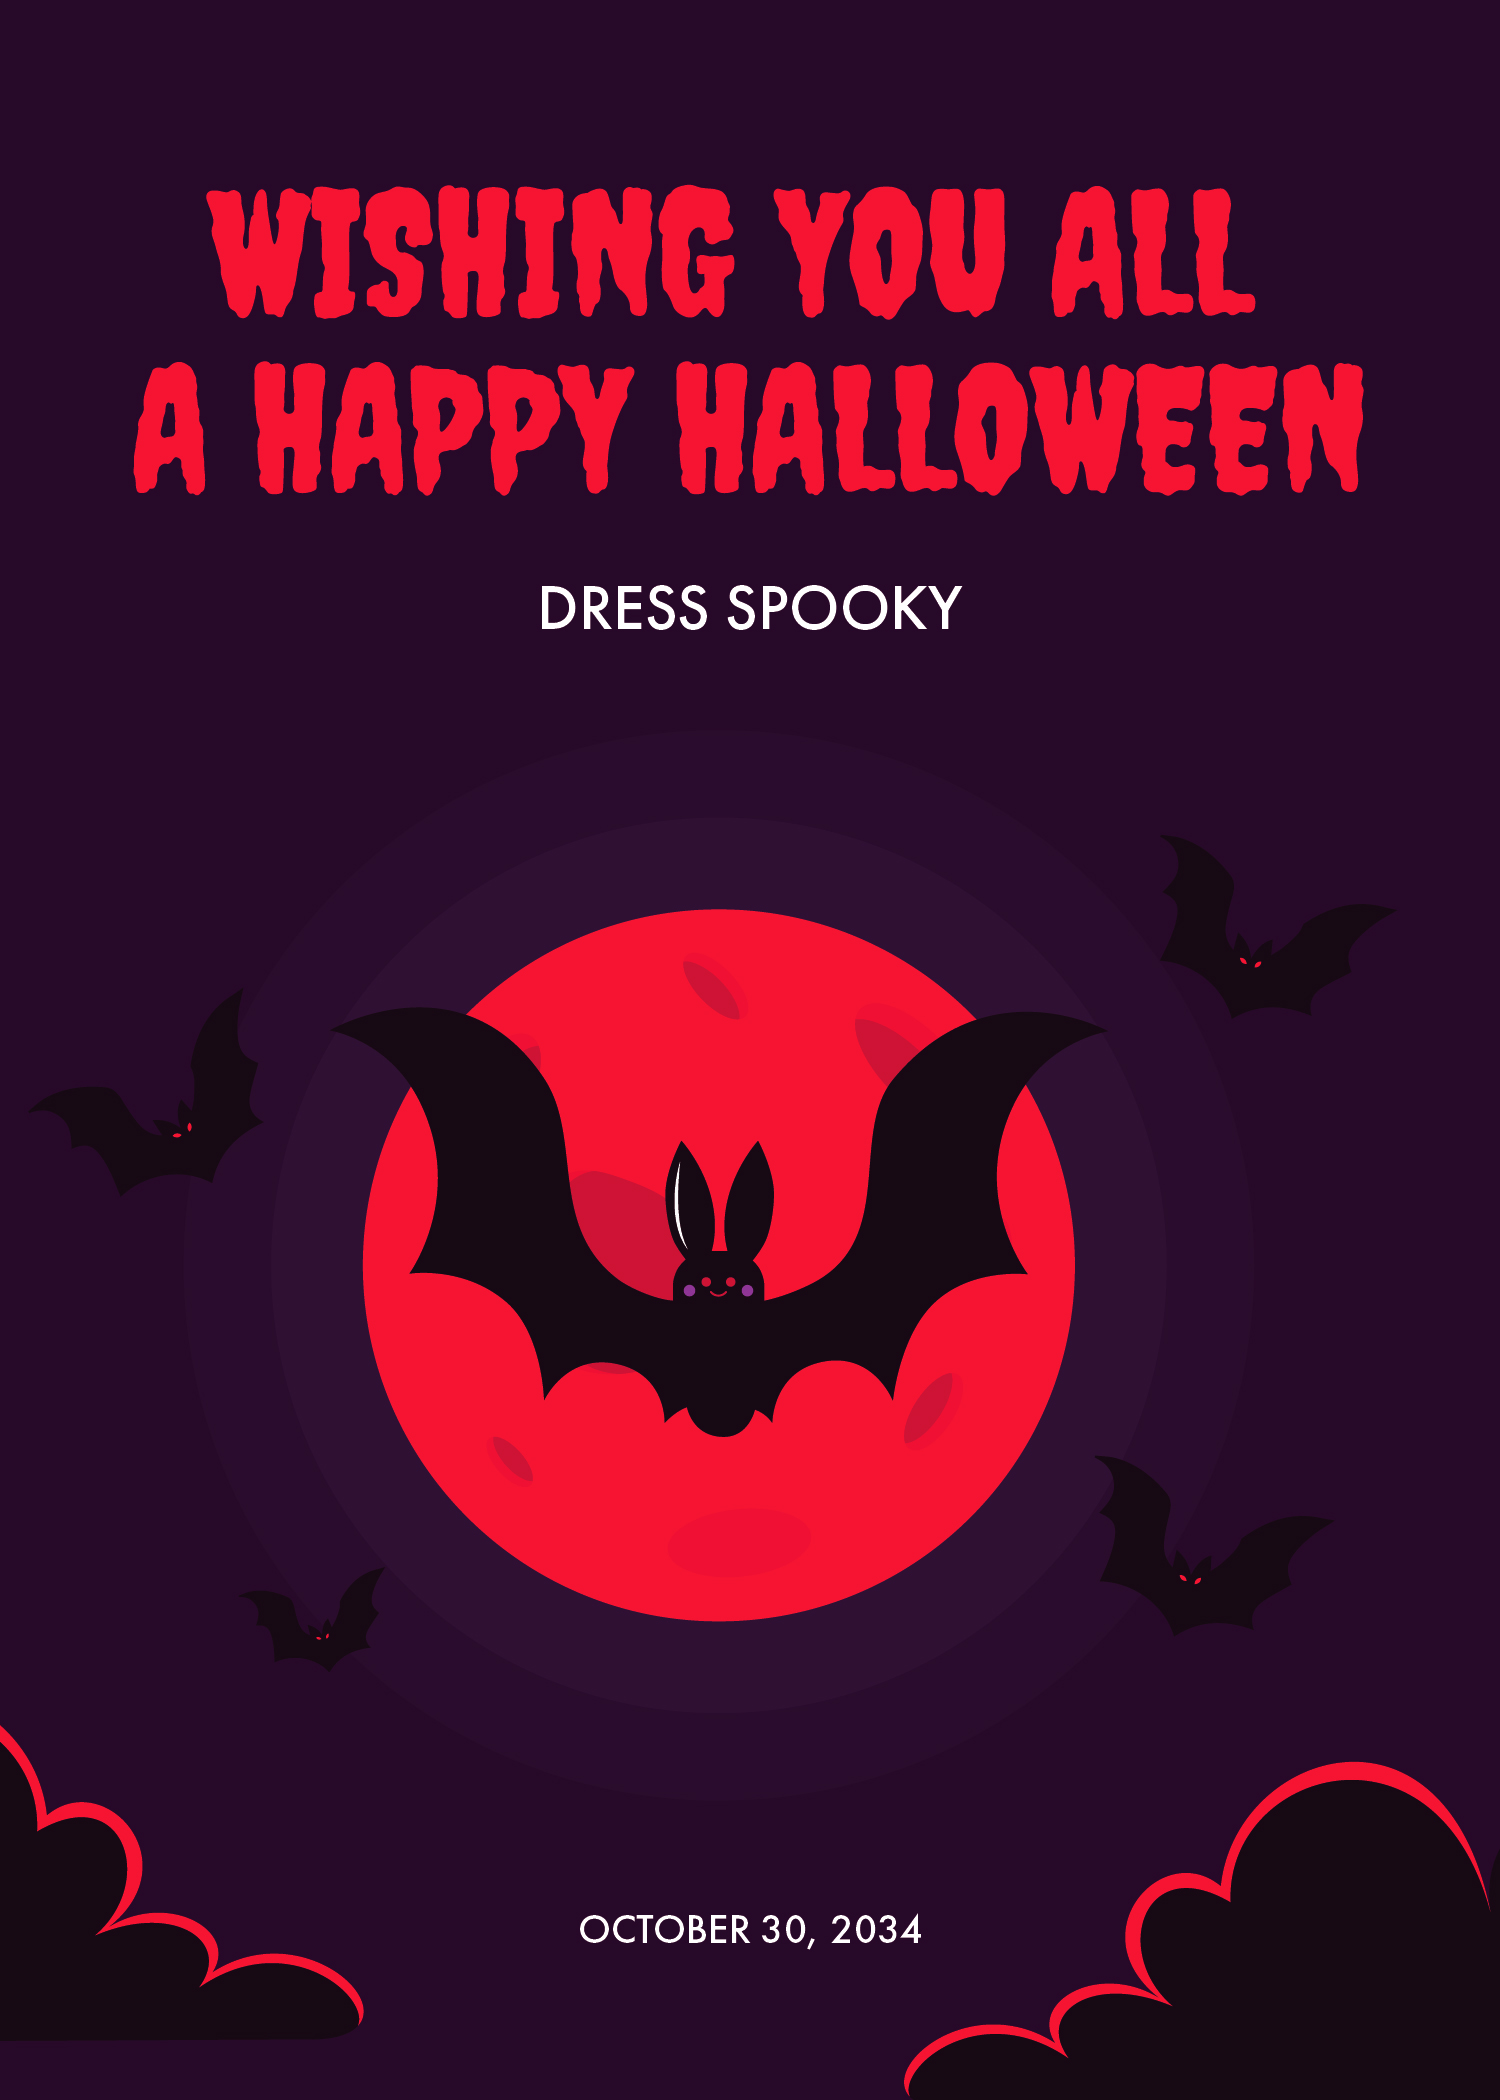 Free Halloween Wishes in Word, Google Docs, Illustrator, PSD, Publisher, EPS, SVG, JPG, PNG